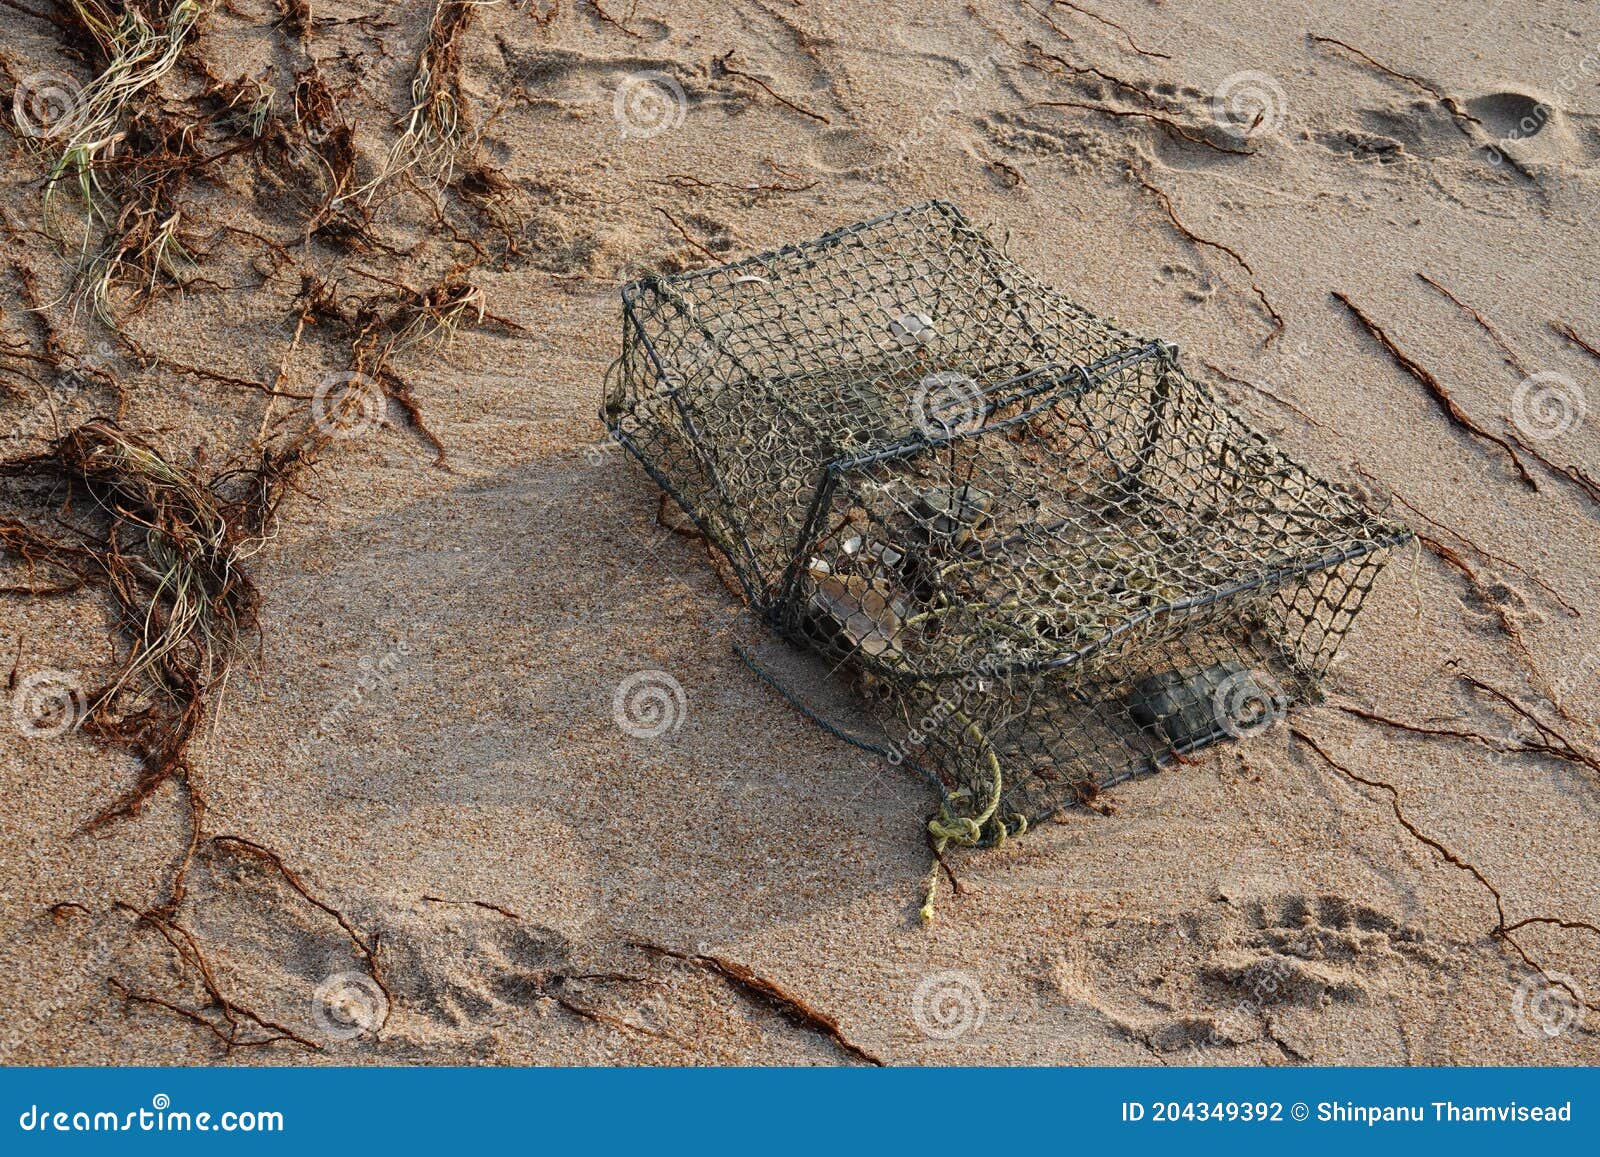 Old Crab Trap or Catcher Boxes for a Crab Catcher on the Beach